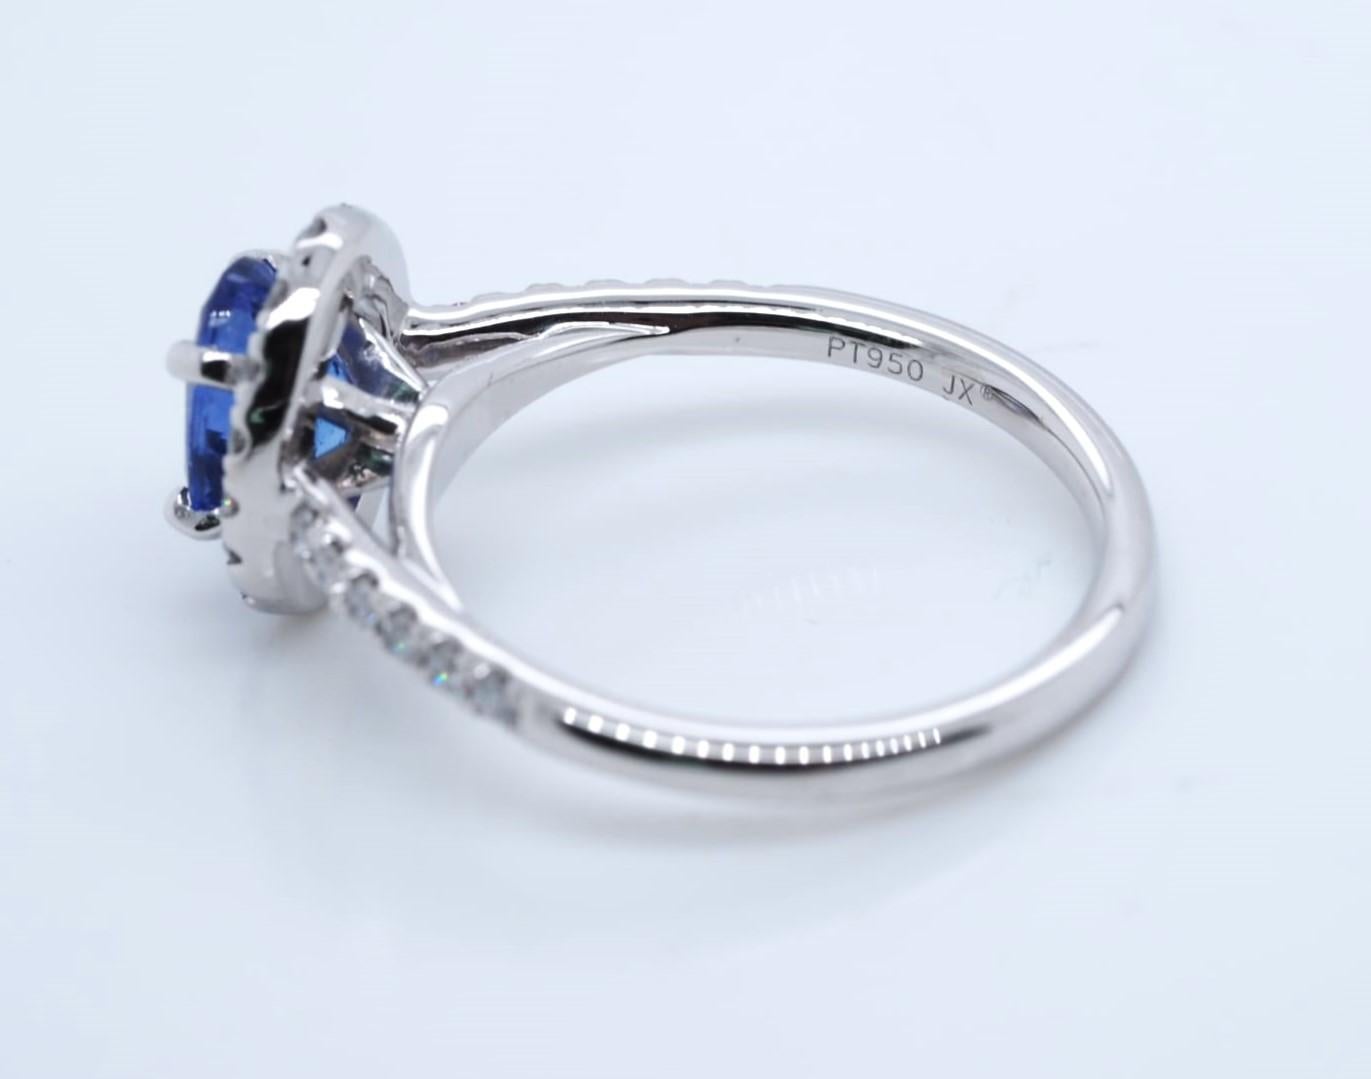 CHOSEN Oval Cut Tanzanite and Diamond Halo Engagement Ring in Platinum 950 In Excellent Condition For Sale In Addison, TX